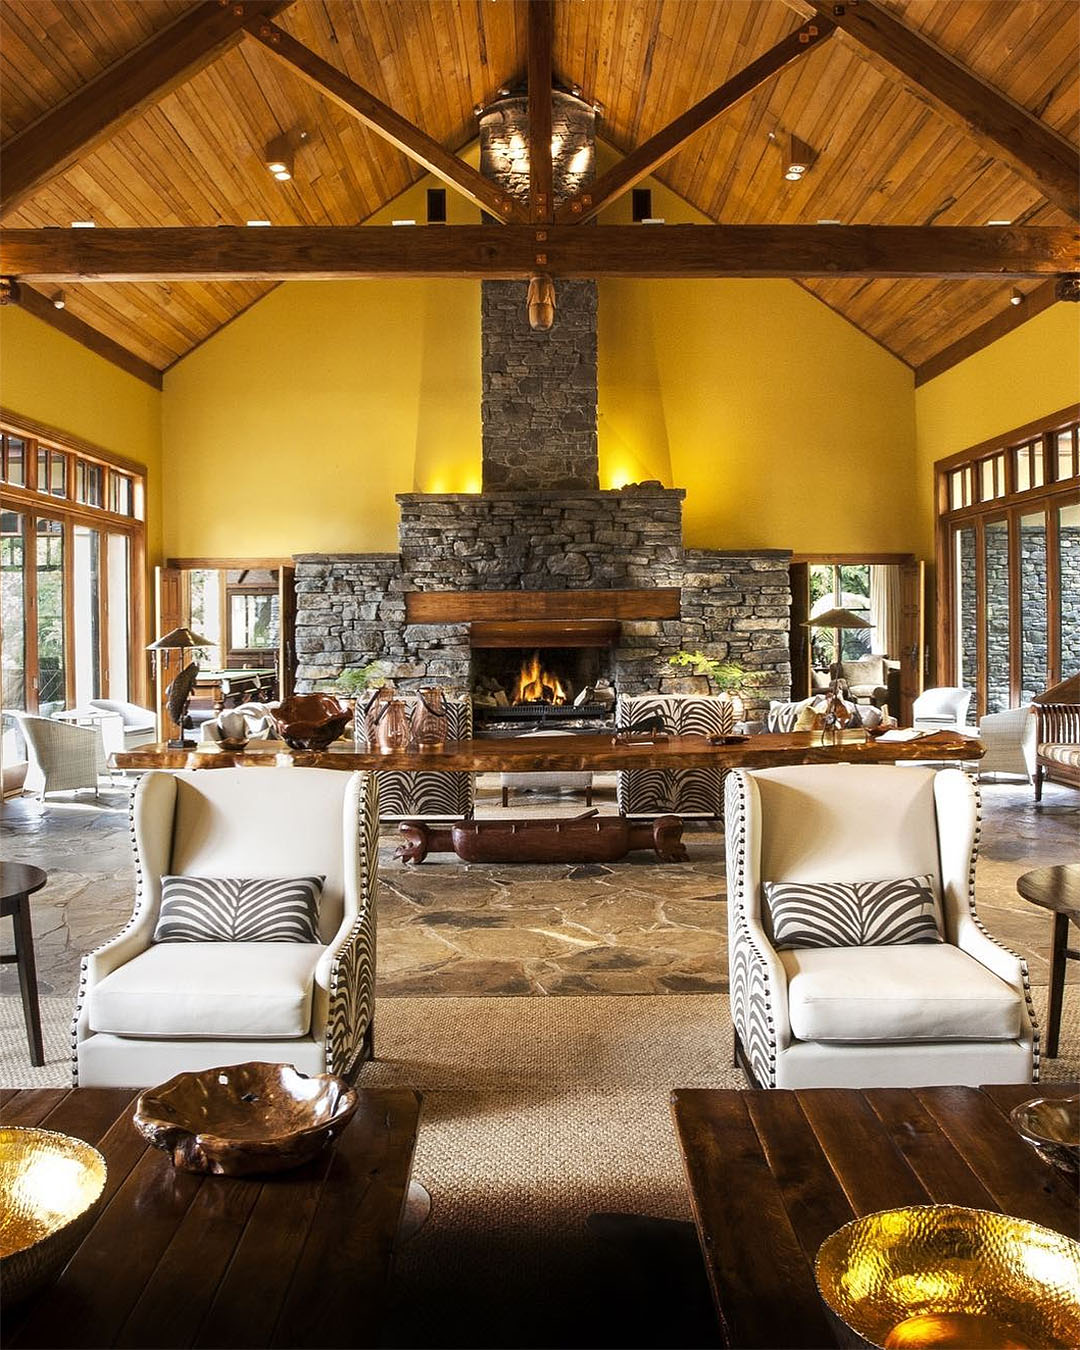 The Great Room at Treetops lodge and estate shows a fireplace in the background.